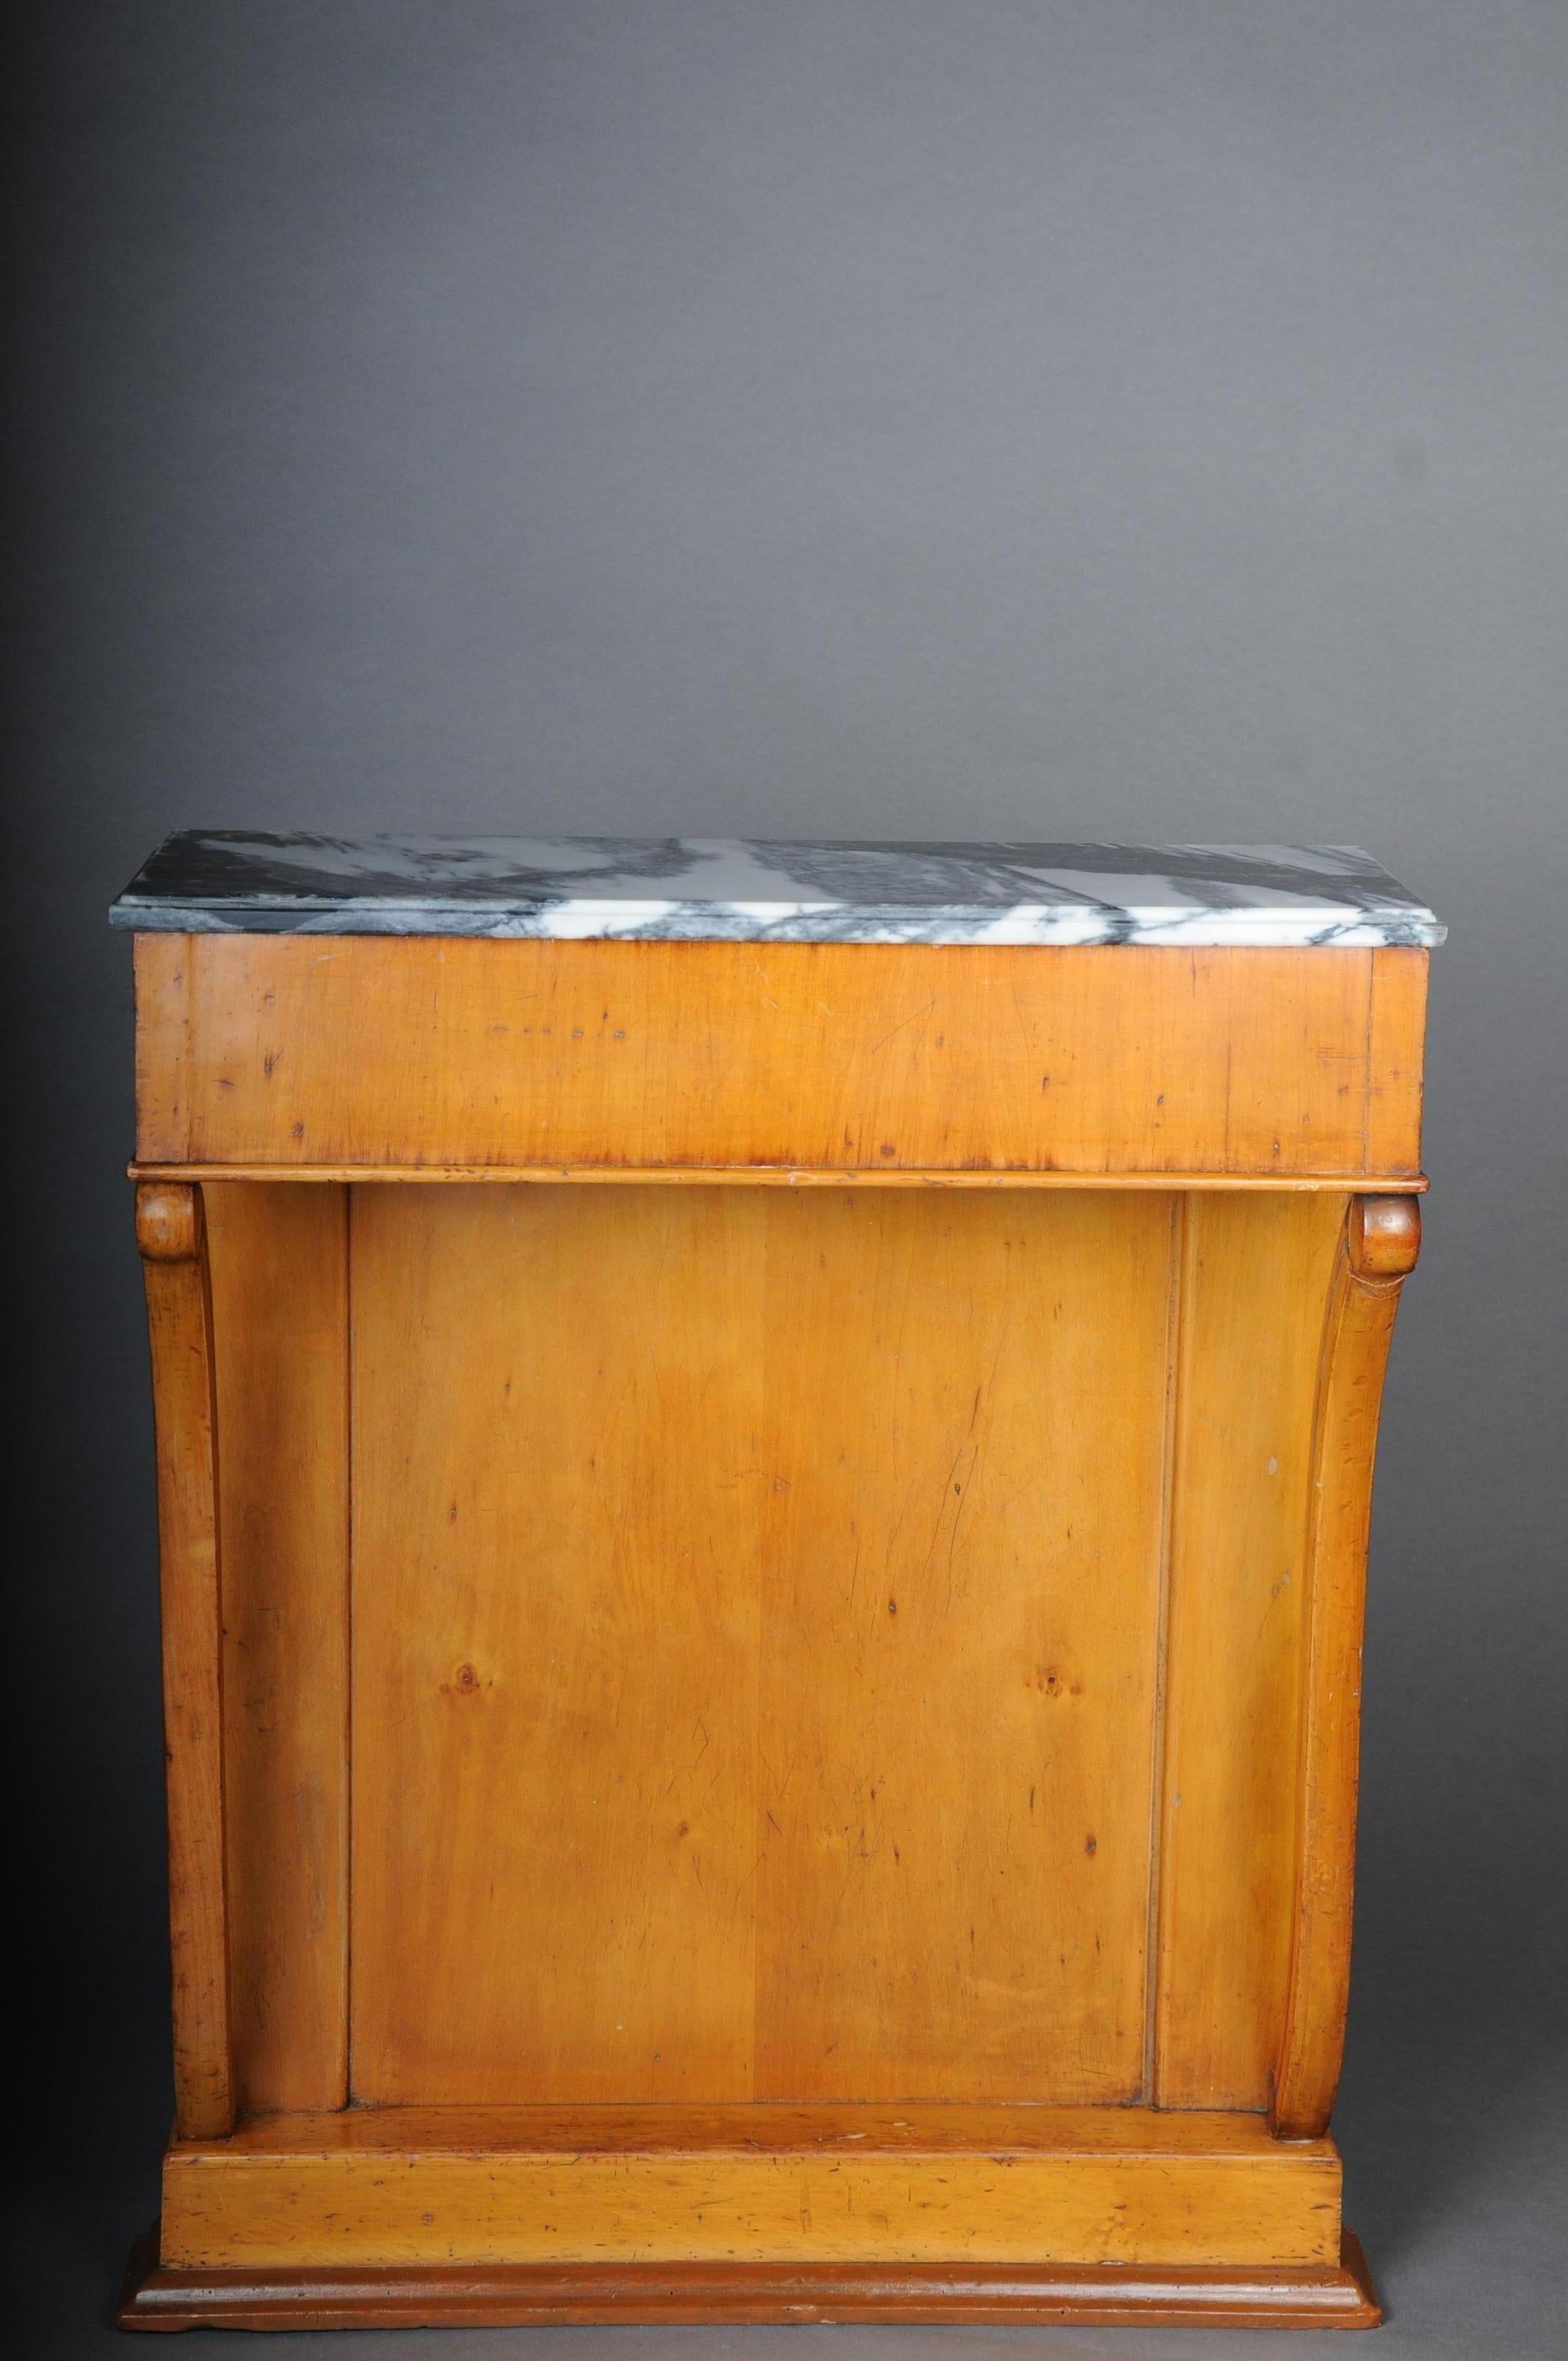 Antique Biedermeier console circa 1830, fruit wood.

Solid fruit wood body with 2 curved columns. Cover plate with mottled marble top. Narrow body which is ideal for narrow corridors or the like.

(E-39).